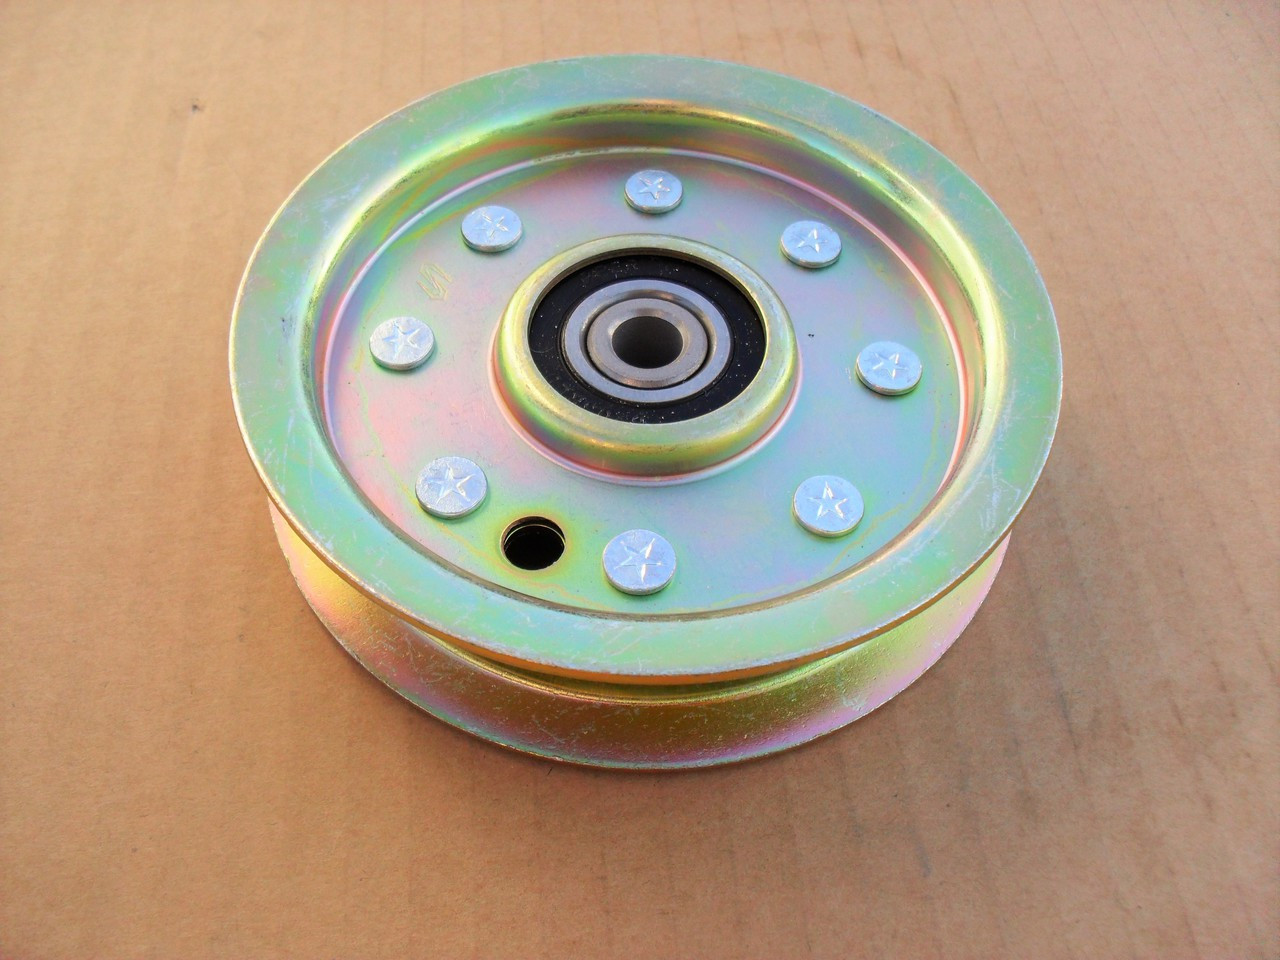 Deck Flat Idler Pulley for Husqvarna 532175820, 596481401, ID: 3/8", OD: 4-1/2", Height: 1"